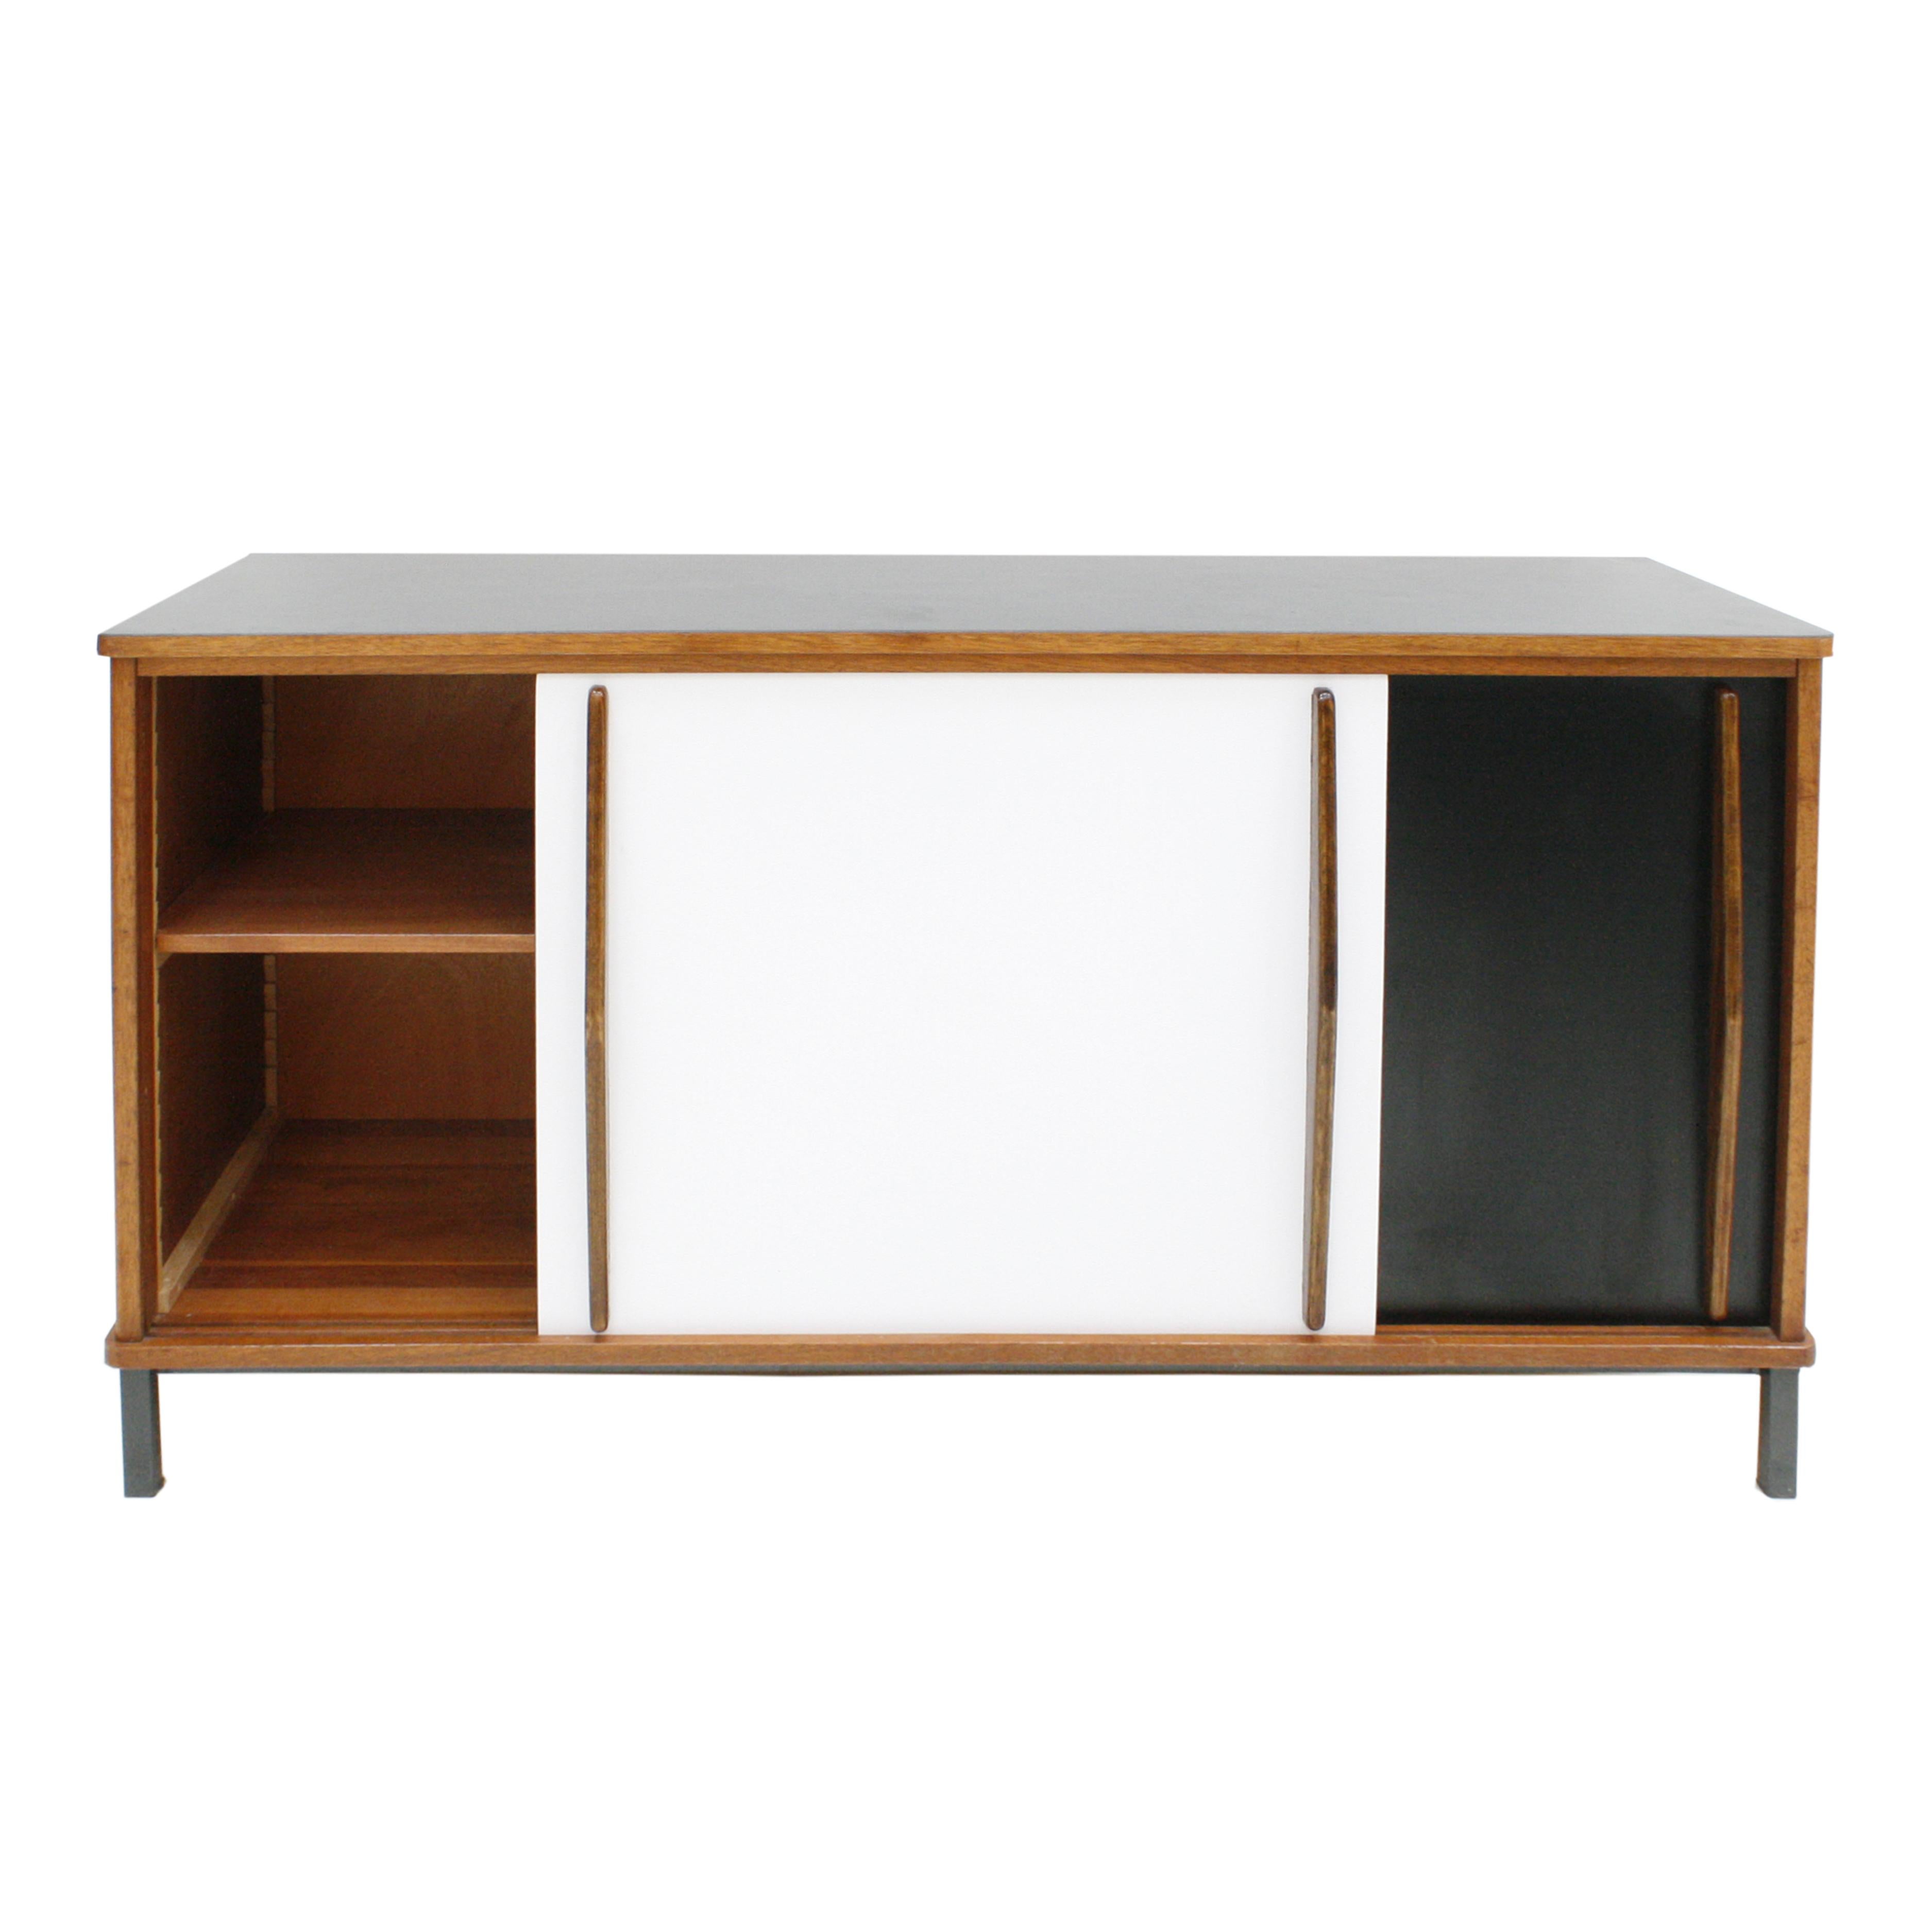 Mid-20th Century Charlotte Perriand Mid-Century Modern Wood and Metal 